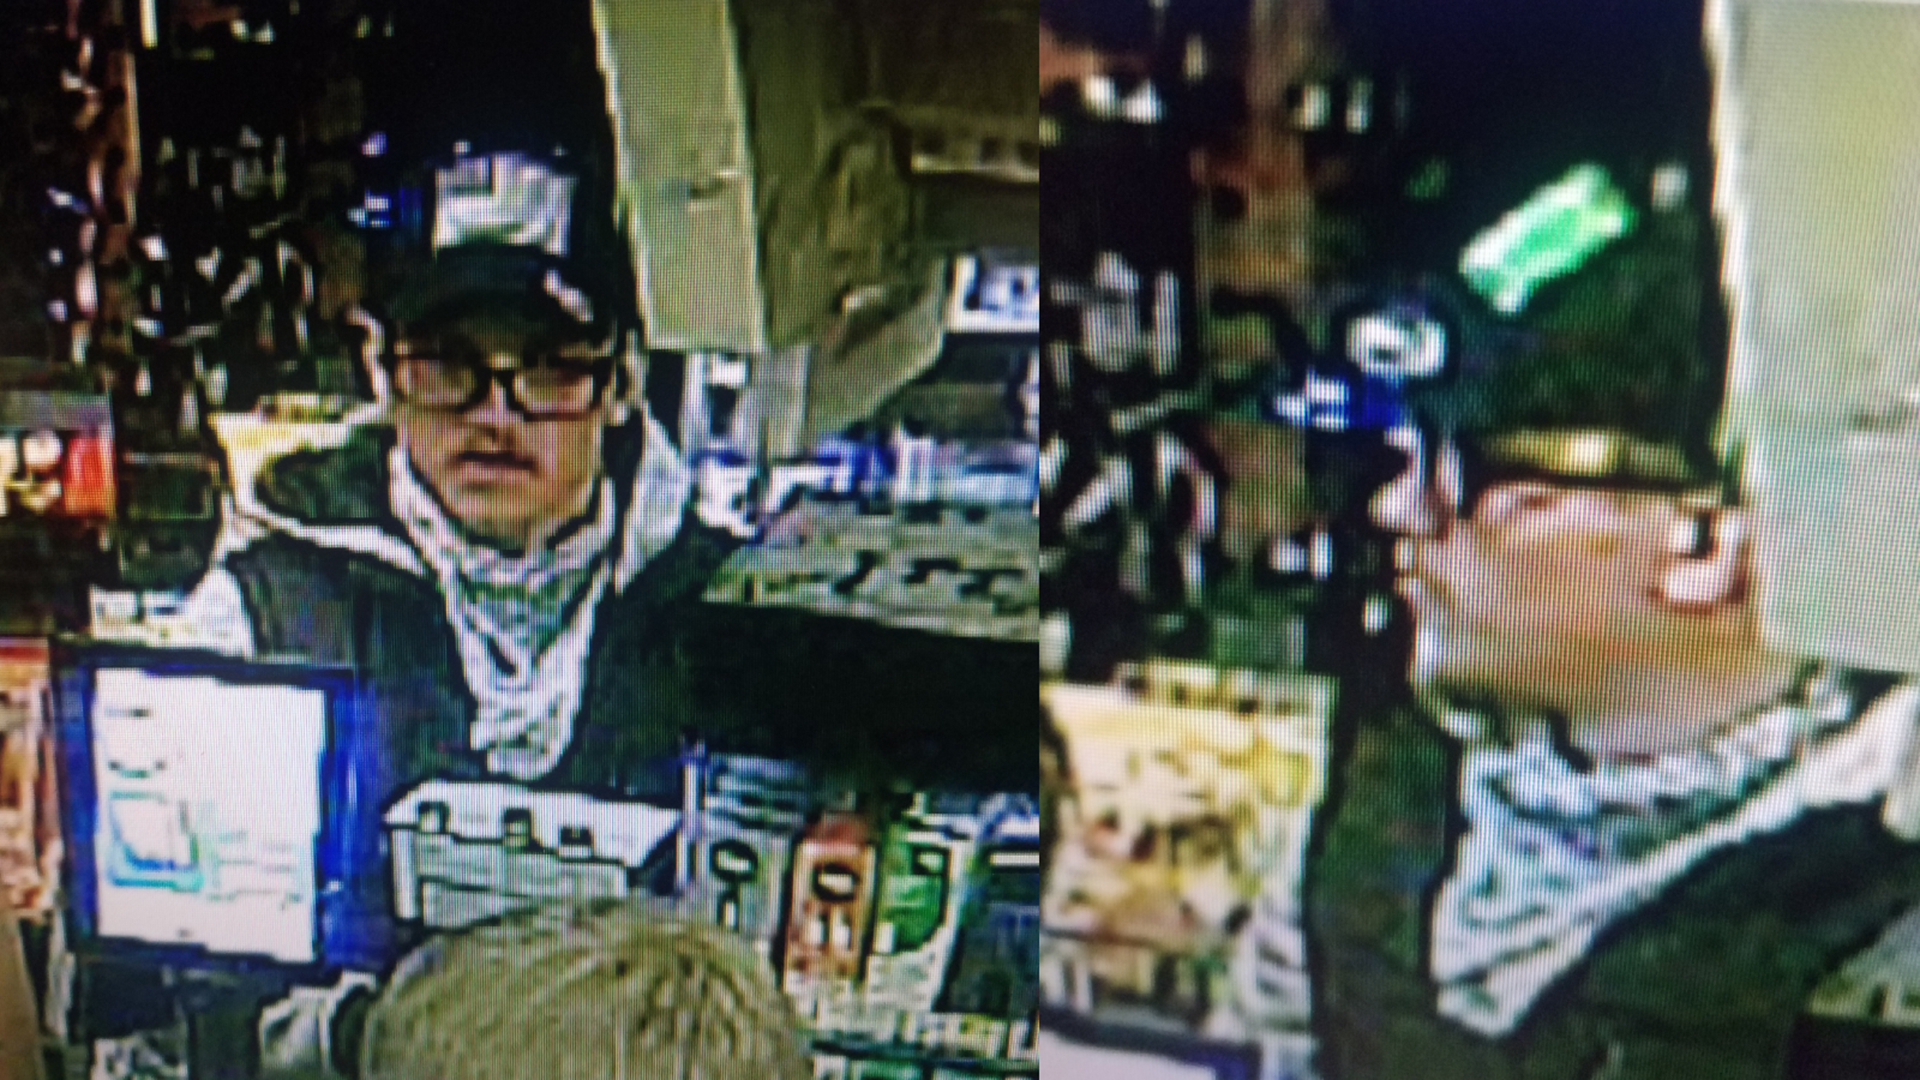 Police in Holland are looking for the man who they say robbed a Speedway gas station early Sunday morning. The suspect entered the store and displayed hand gun, law enforcement said. He then took cash and cigarettes from the store on South Washington Avenue.